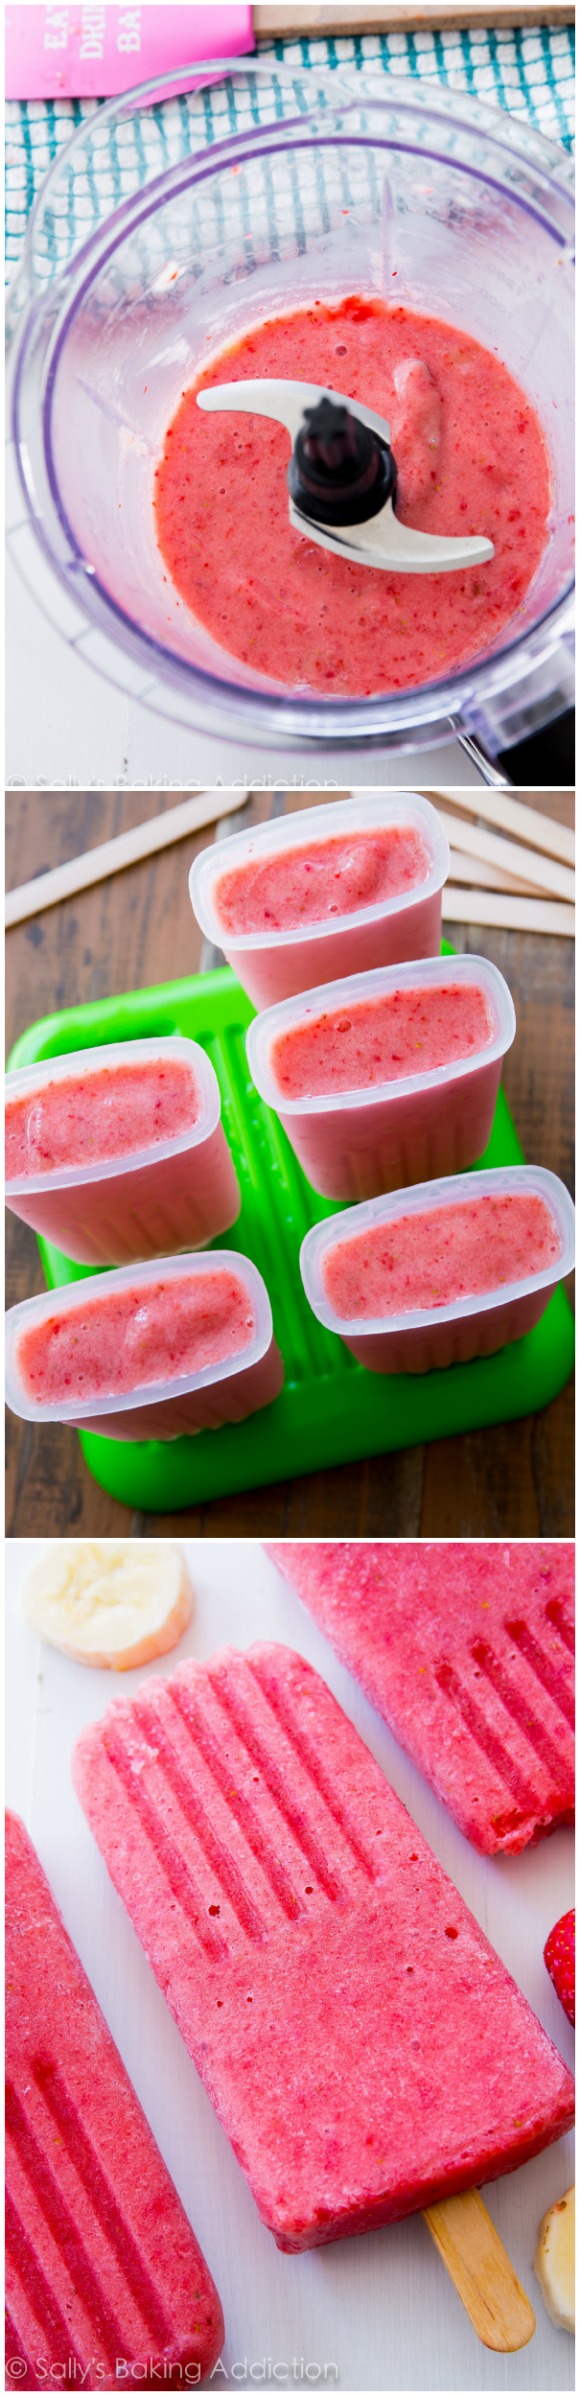 3-Ingredient-Healthy-Strawberry-Banana-Popsicles